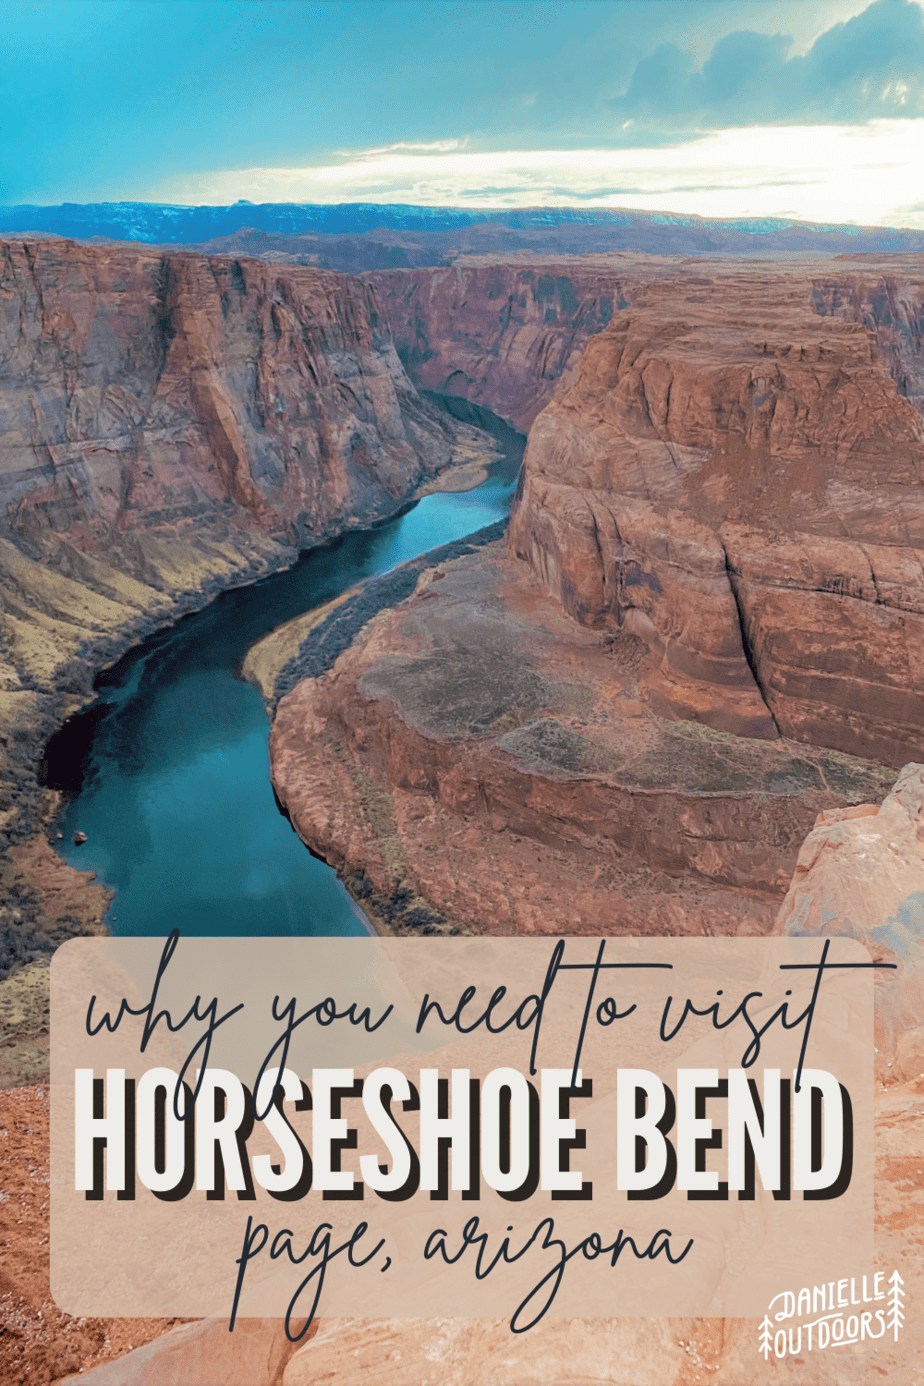 Why You Need to Visit Horseshoe Bend